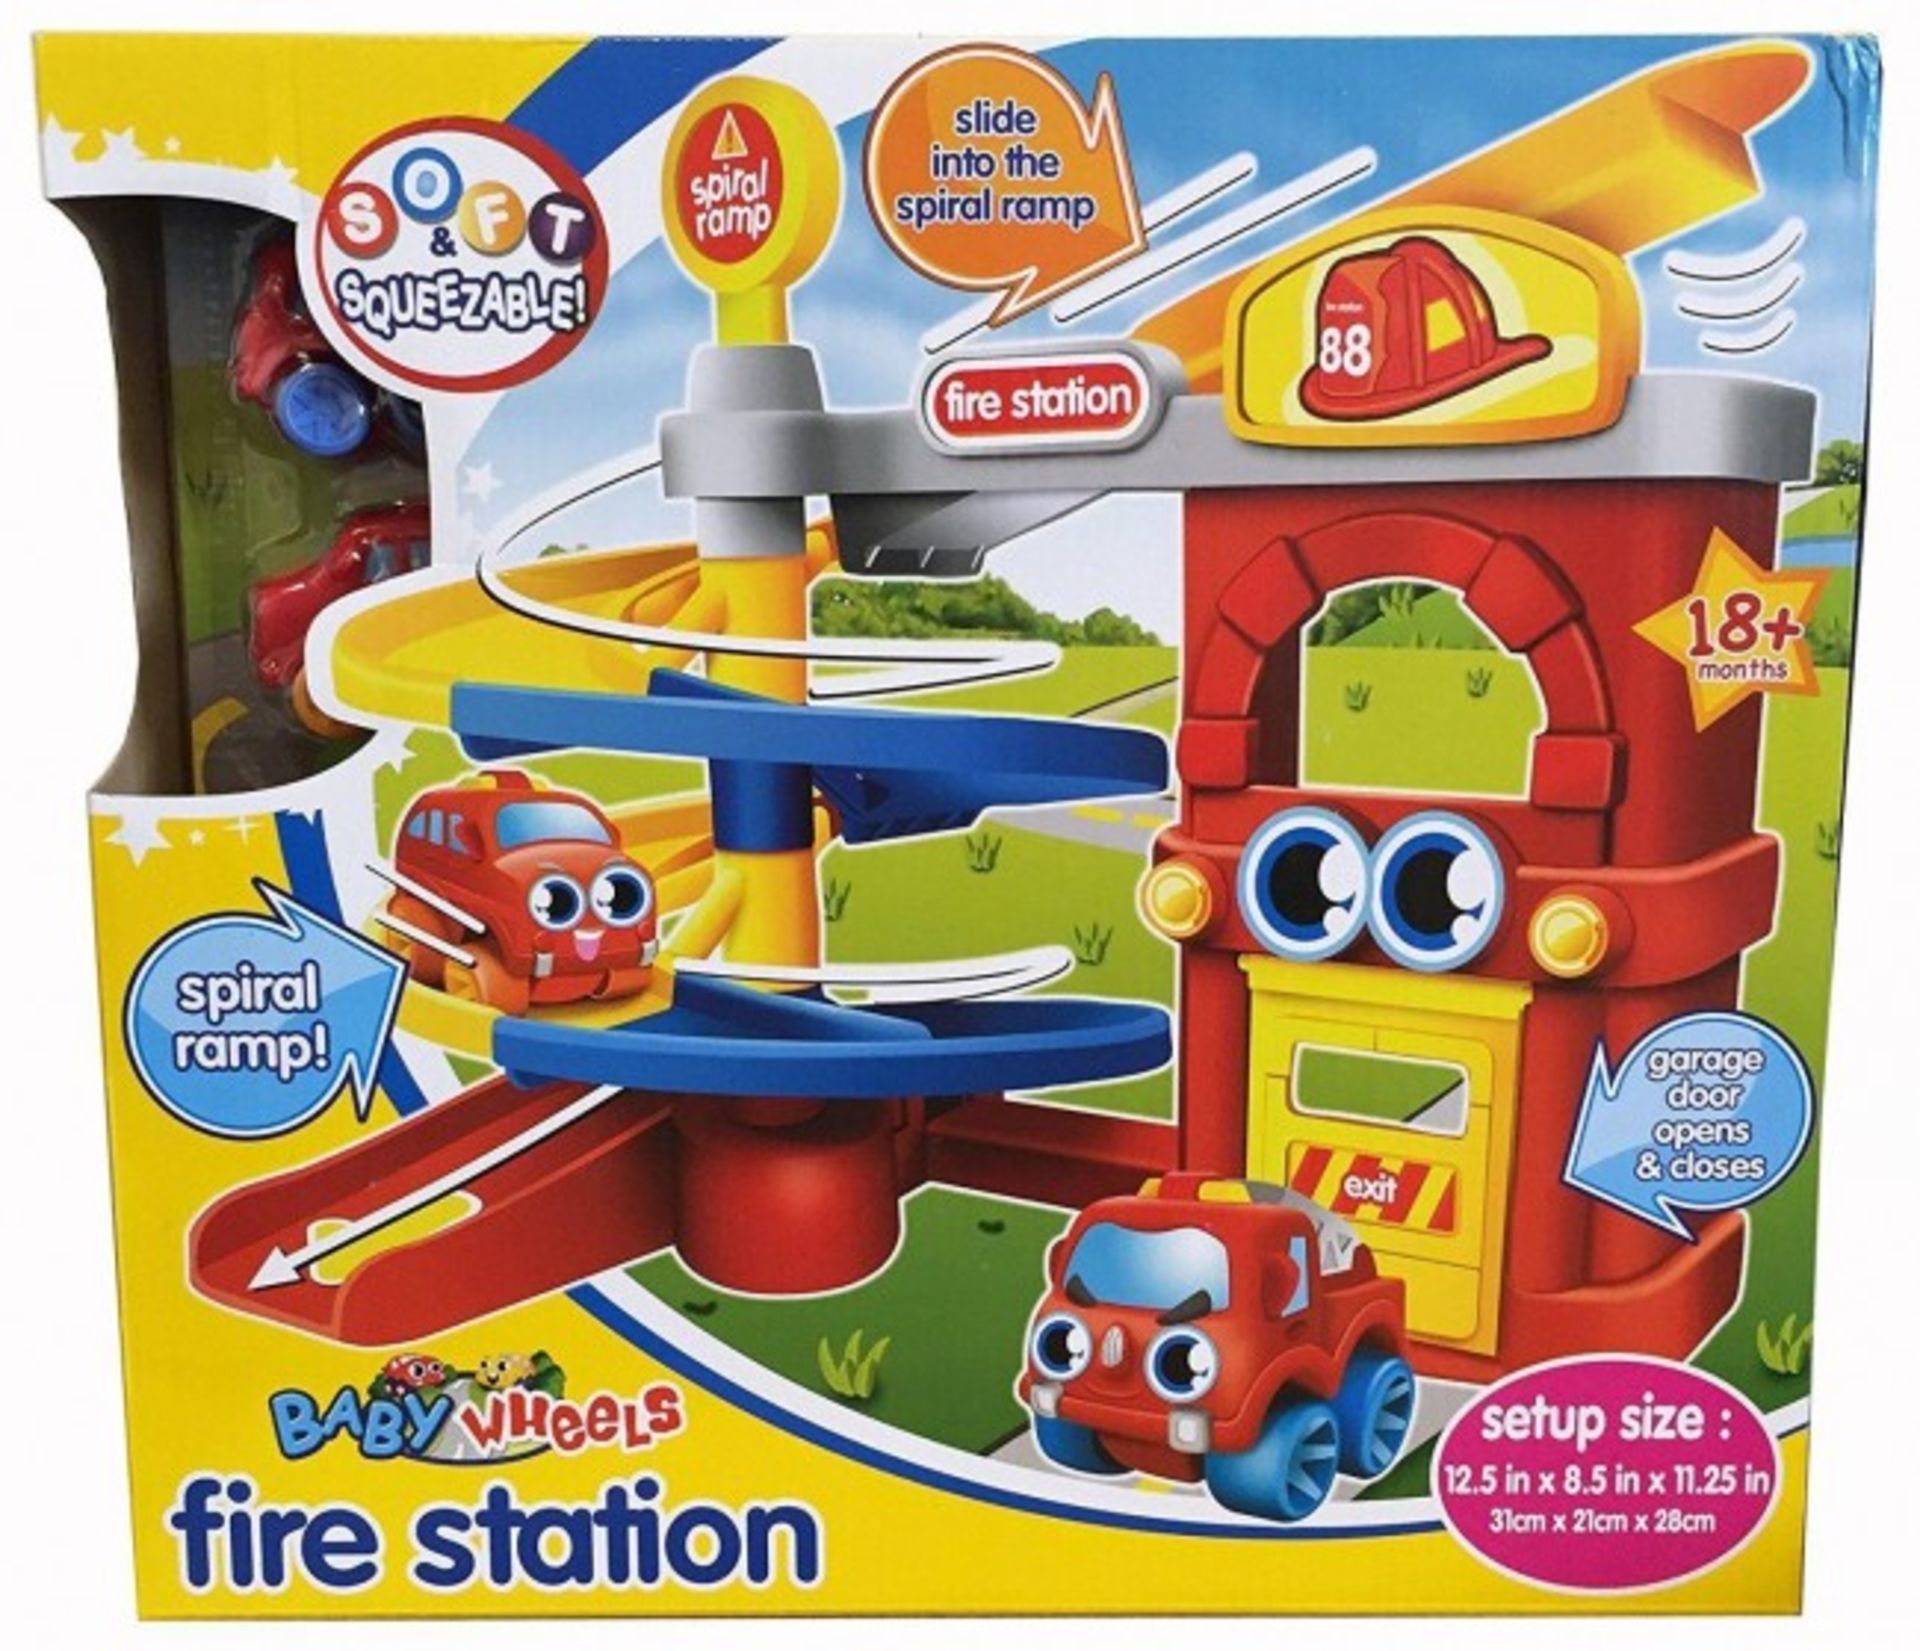 V *TRADE QTY* Brand New Baby Wheels Fire Station Play Set 8mths + ISP £12.99 (My Shop) X 5 YOUR